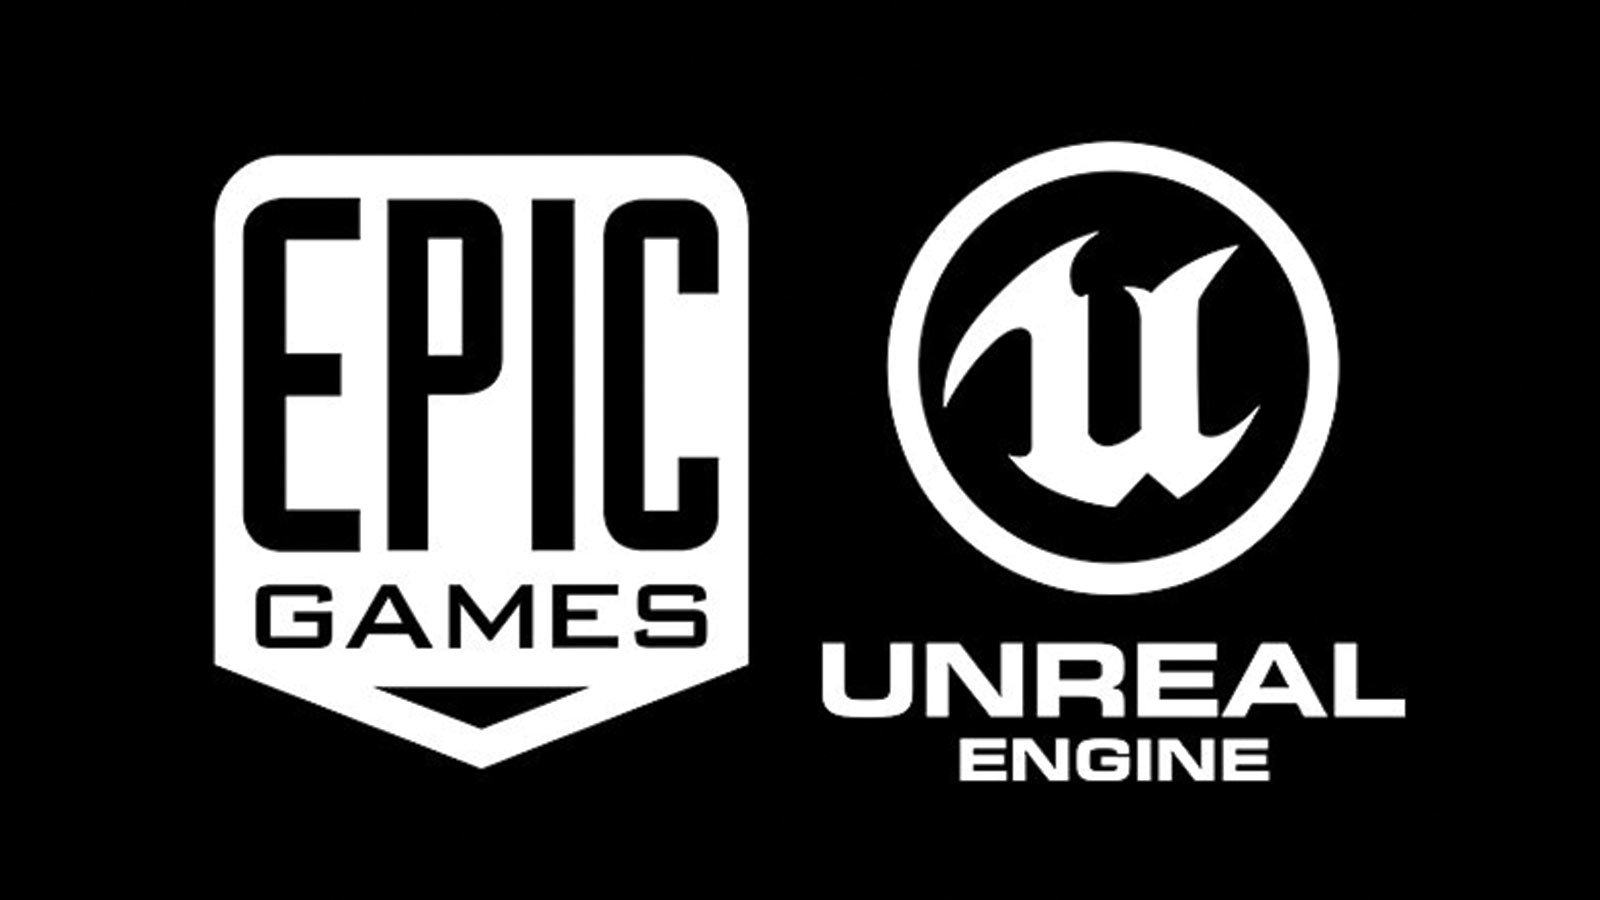 Unreal Engine developers take center stage at The Game Awards 2017